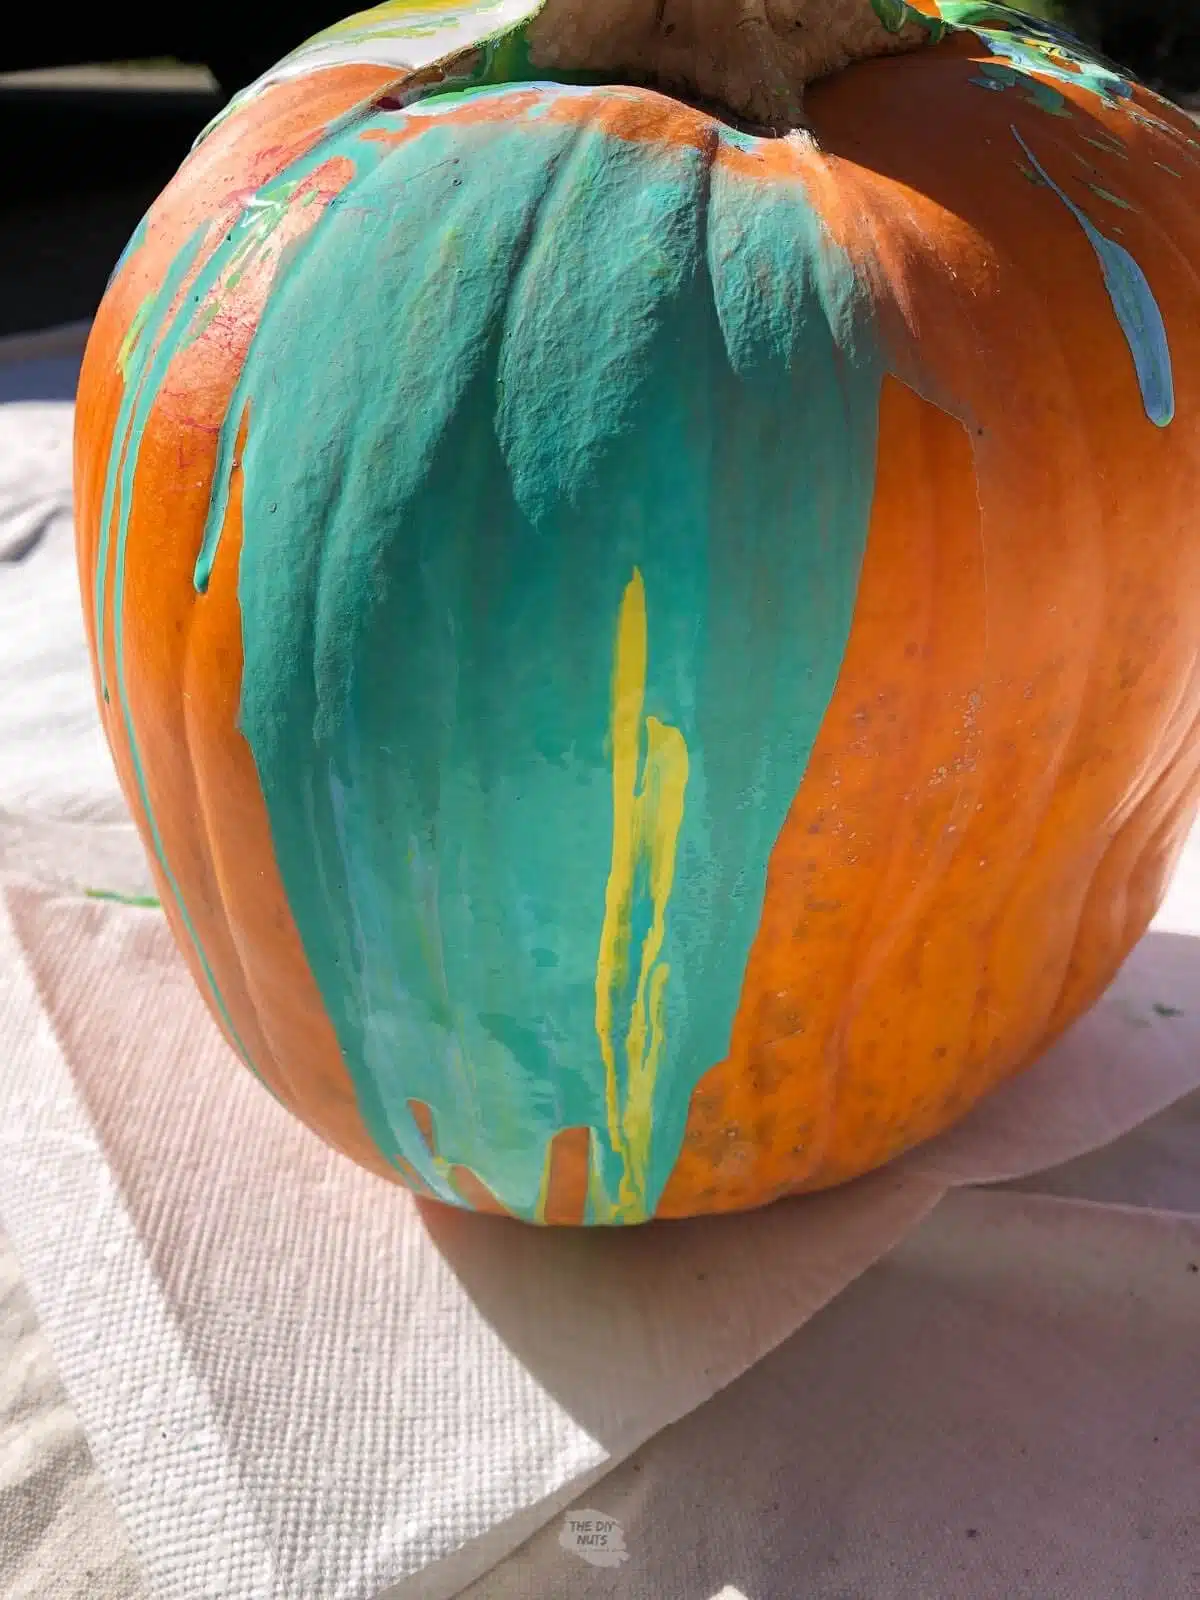 teal paint watered down too much dripping on one side of the pumpkin.